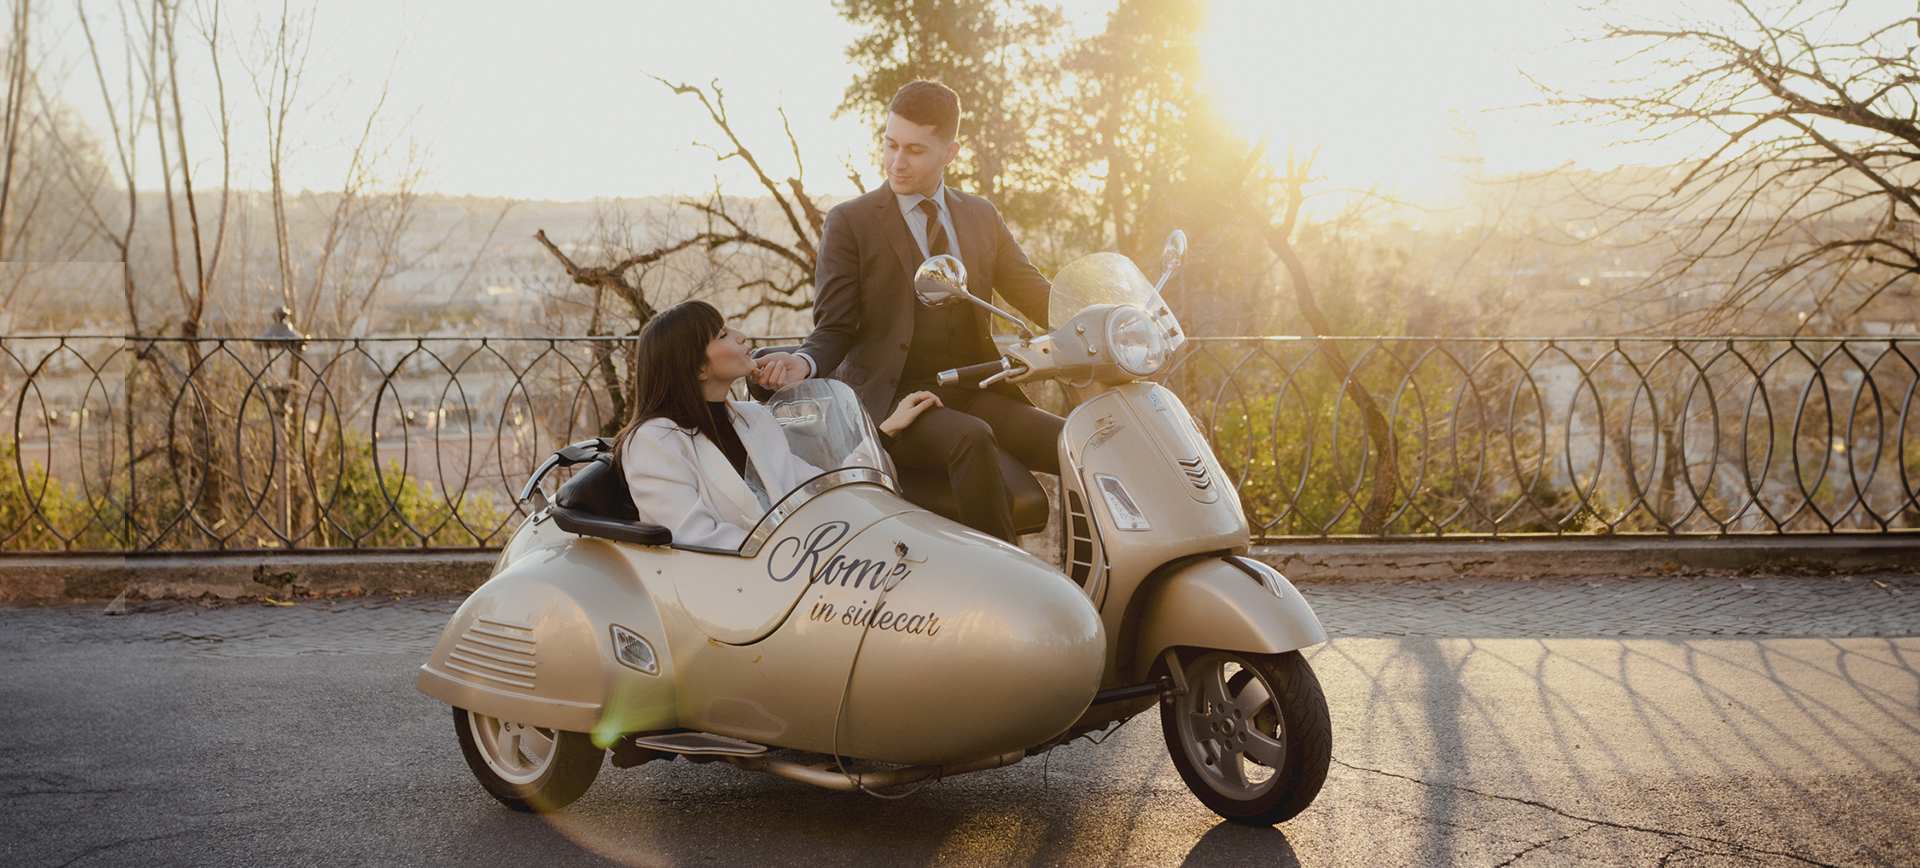 Elopement Package in Italy Vespa City Elopement Package in Rome Italy